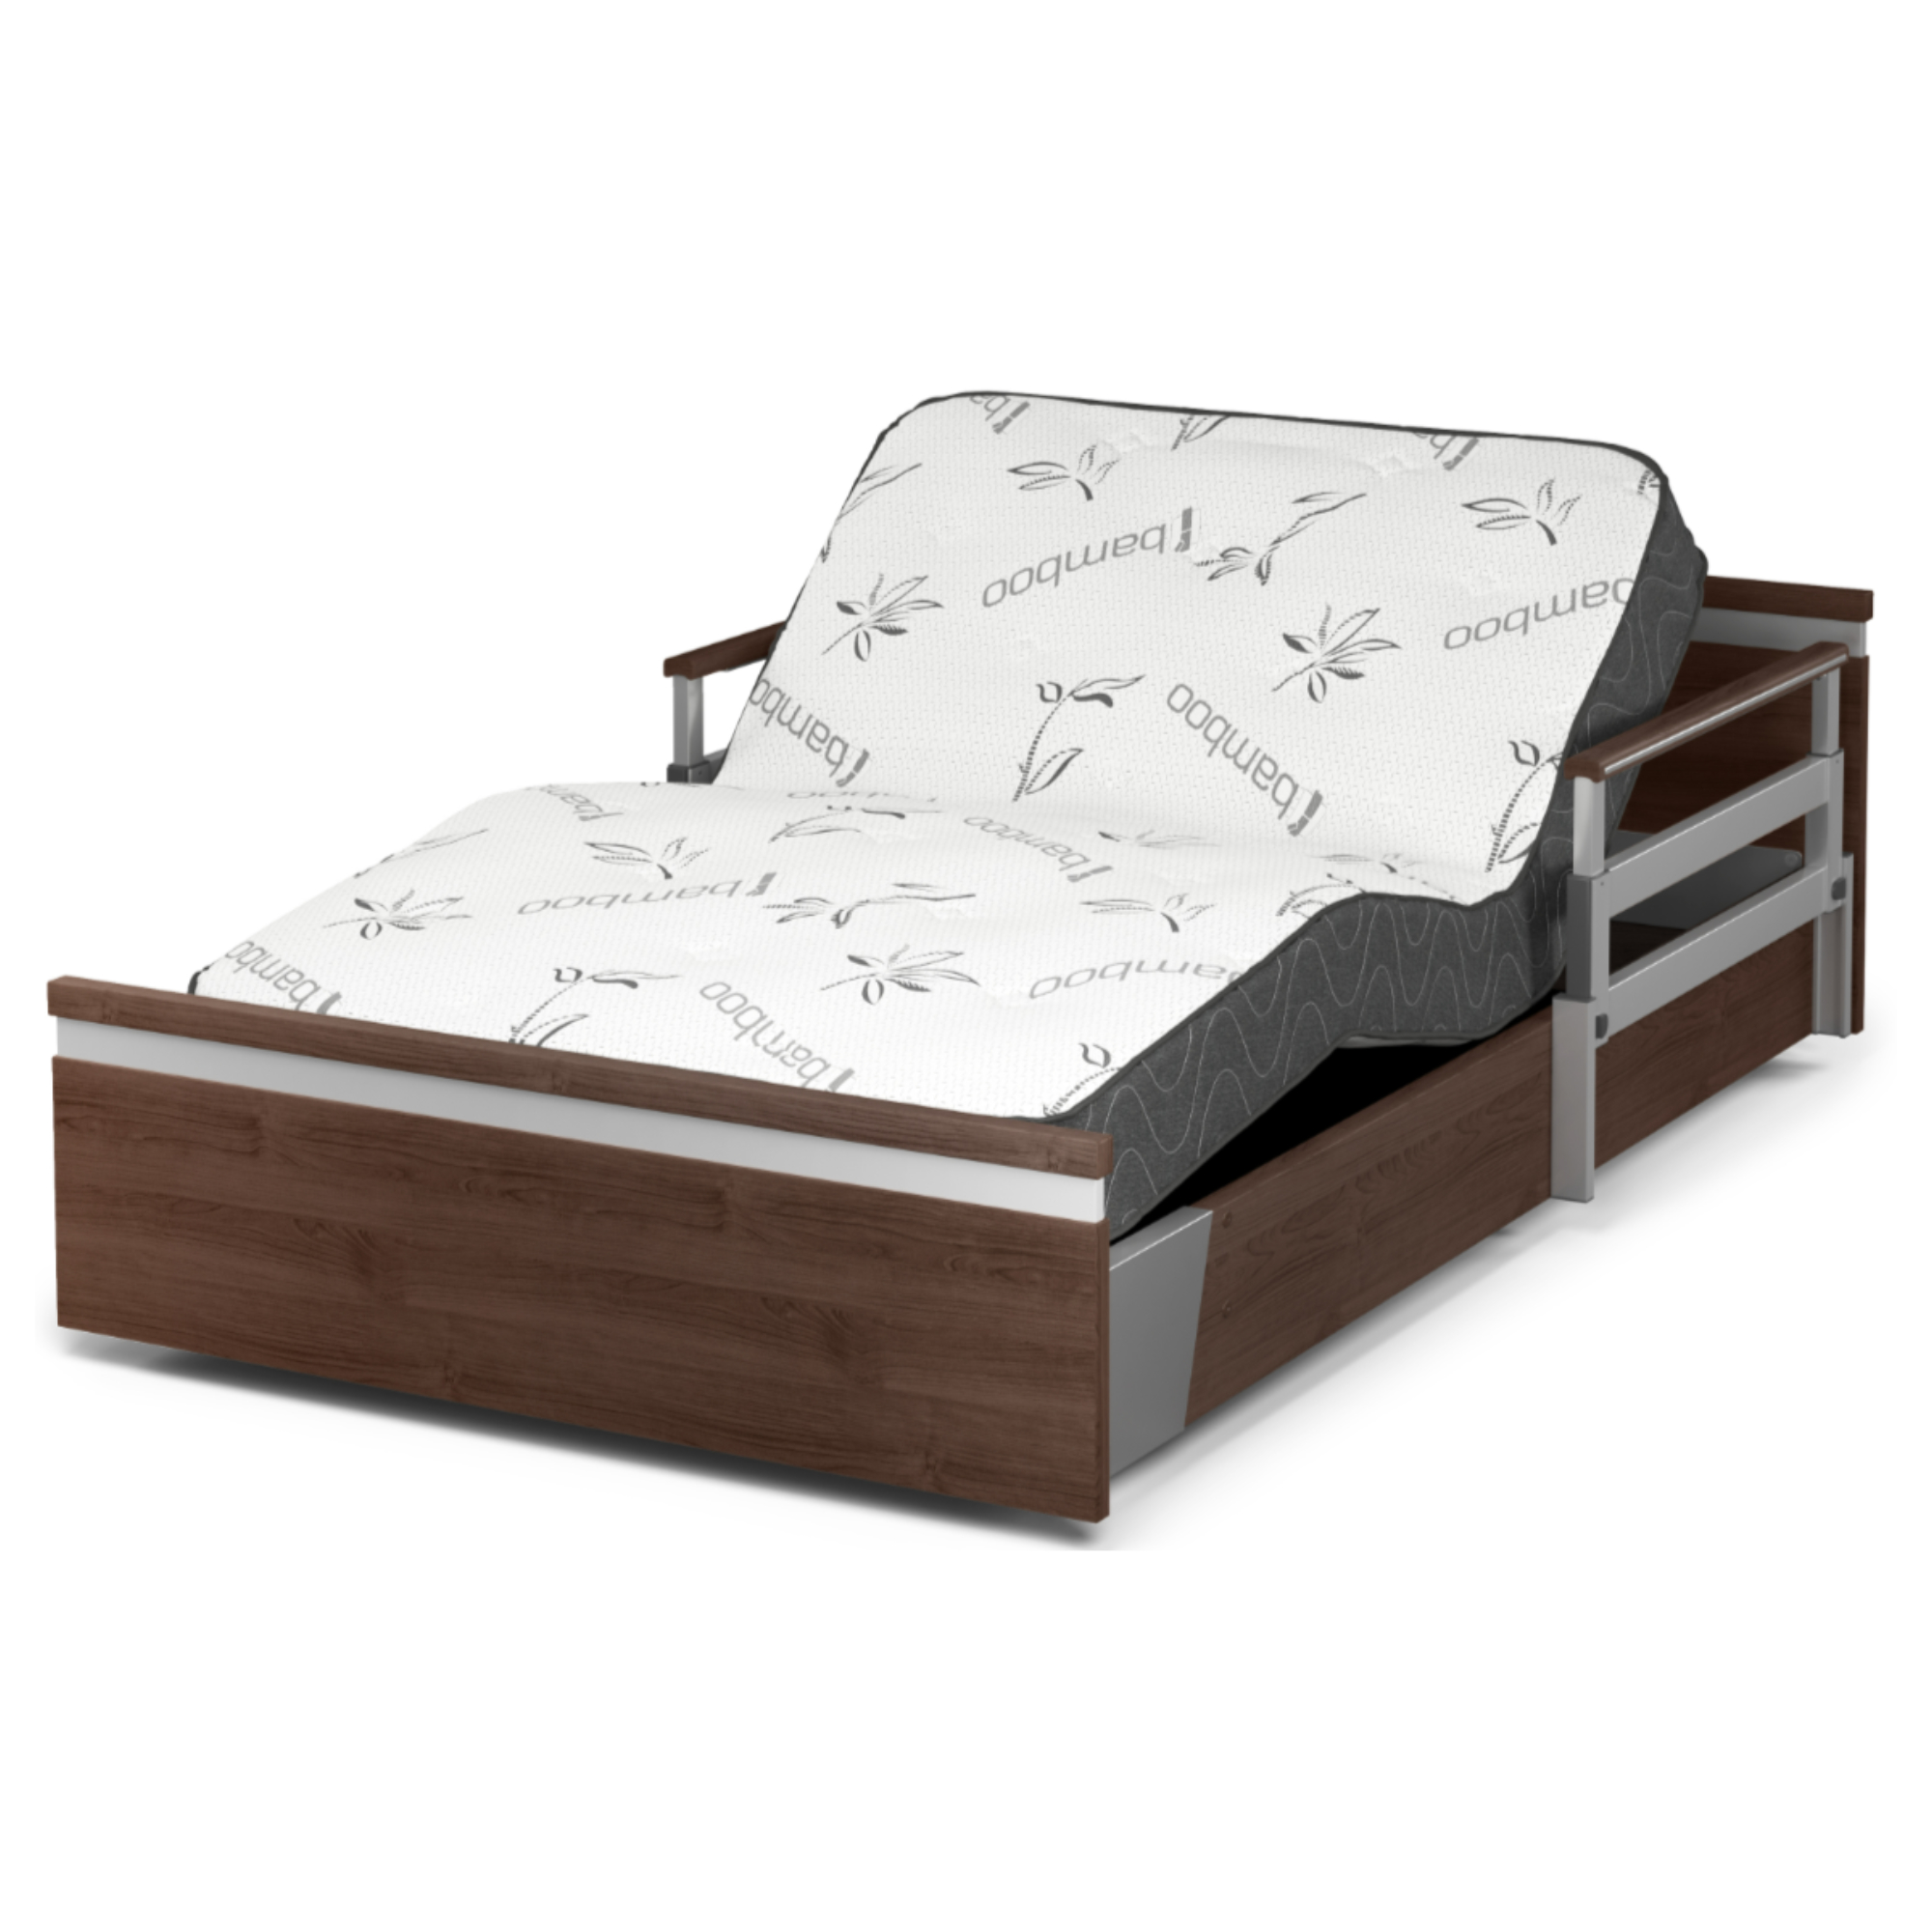 A wide 48" bed with a wooden frame and a SonderCare. Aura™ Wide Hospital Bed – Extra Wide Home Hospital Bed – Large Hospital Bed For Home with mattress.